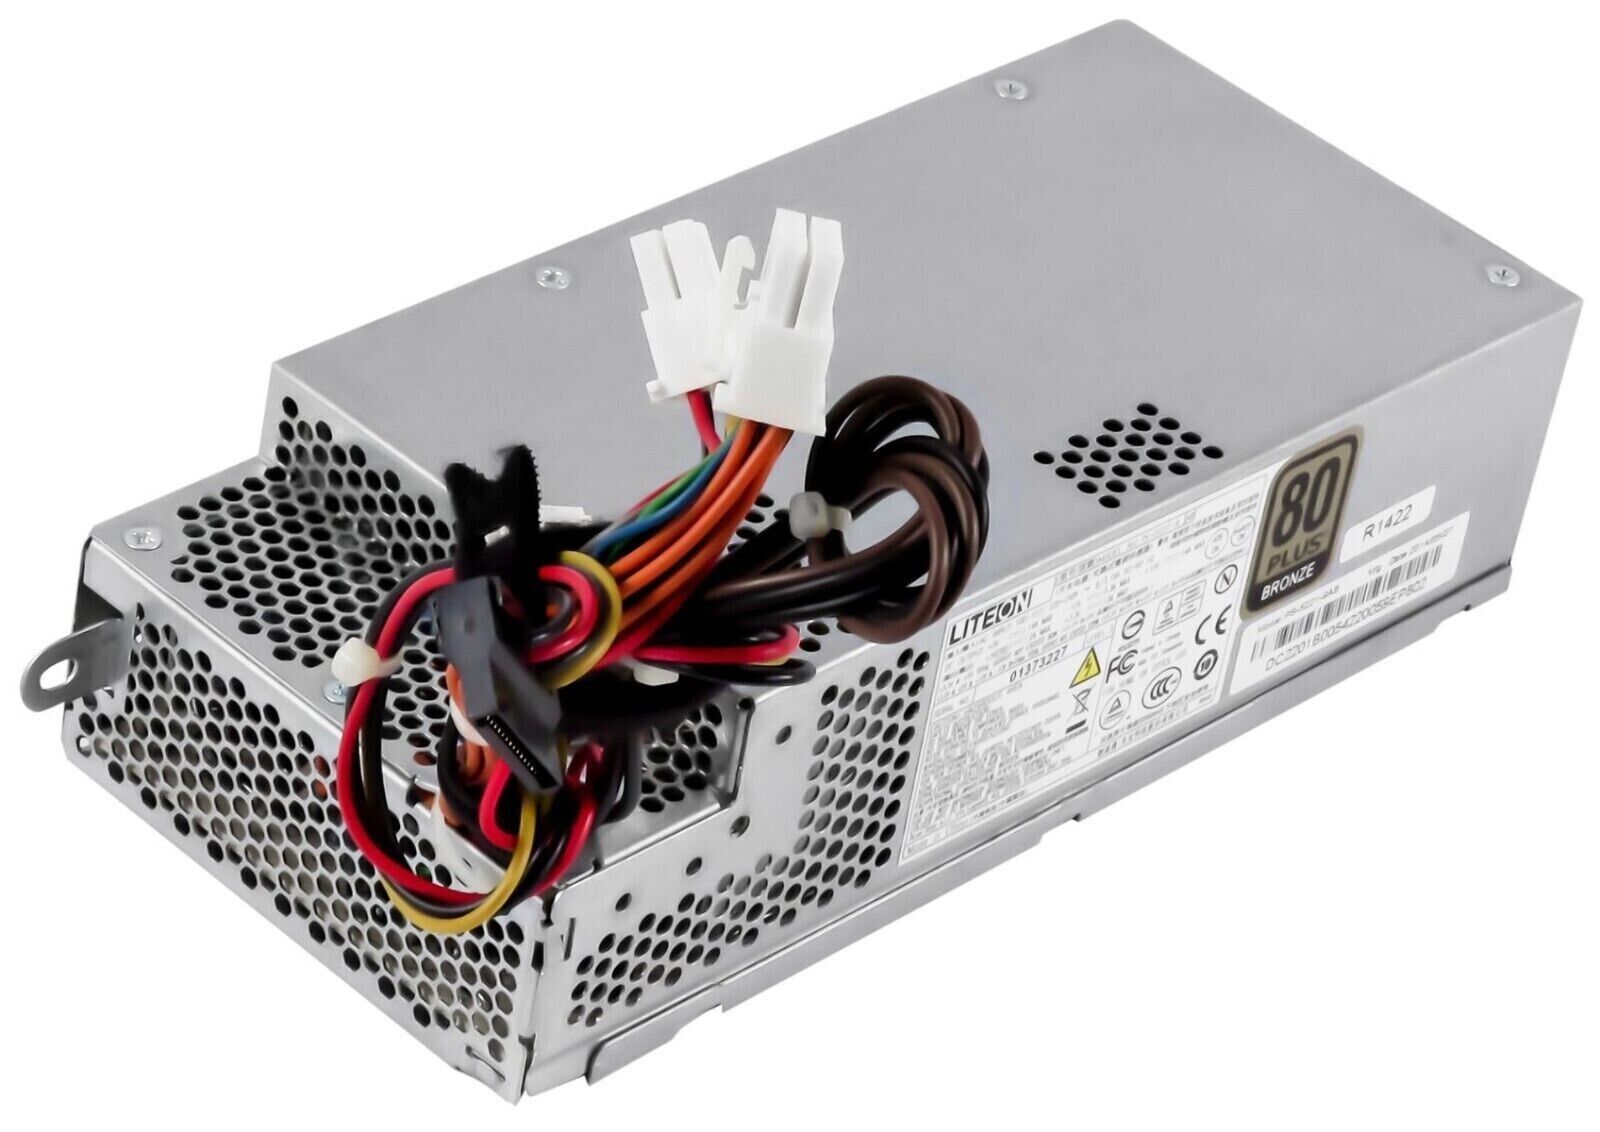 ✔️ LiteOn PS-5221-9AB 220W Power Supply Unit Tested